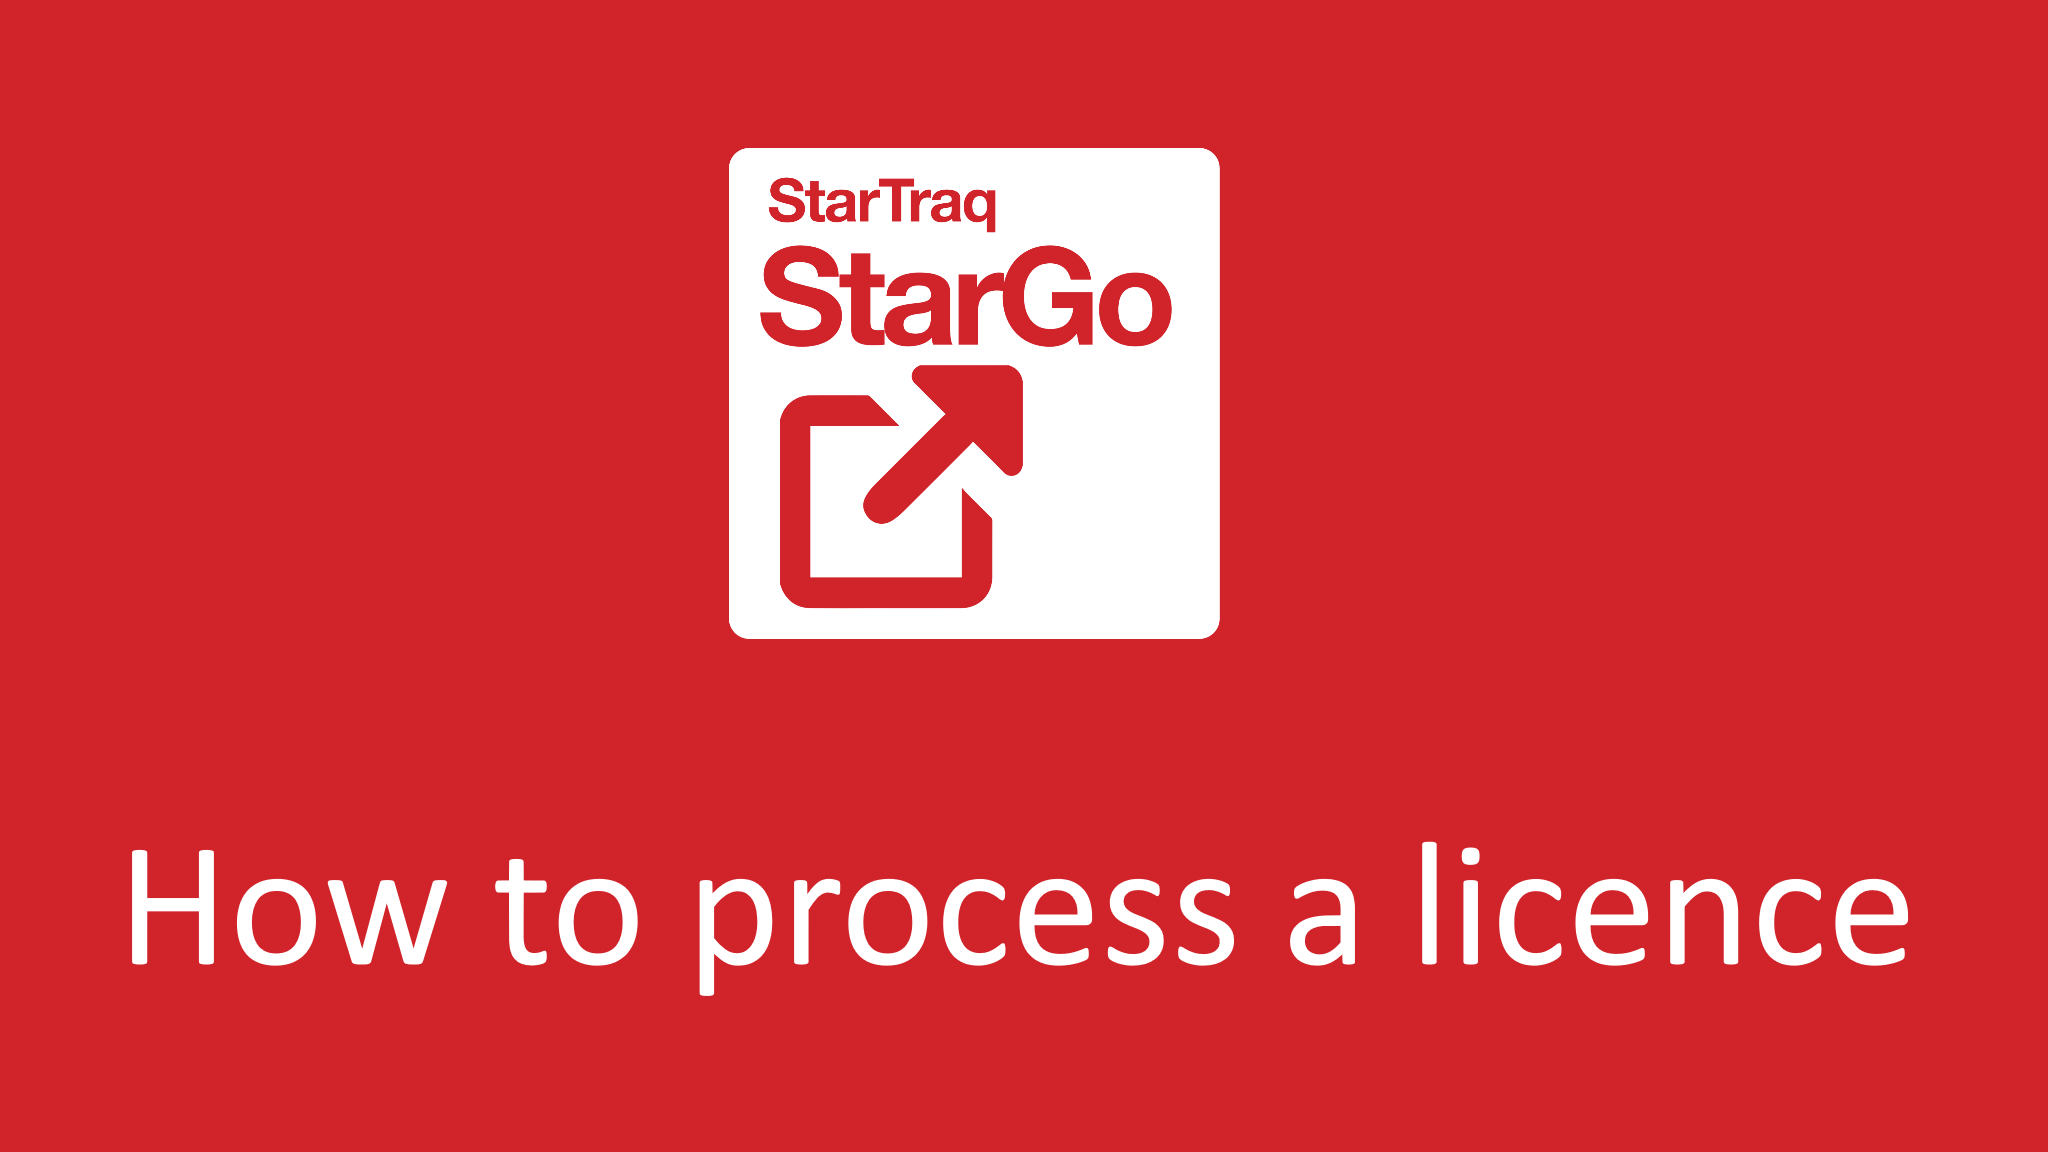 How to process a licence (01:18)